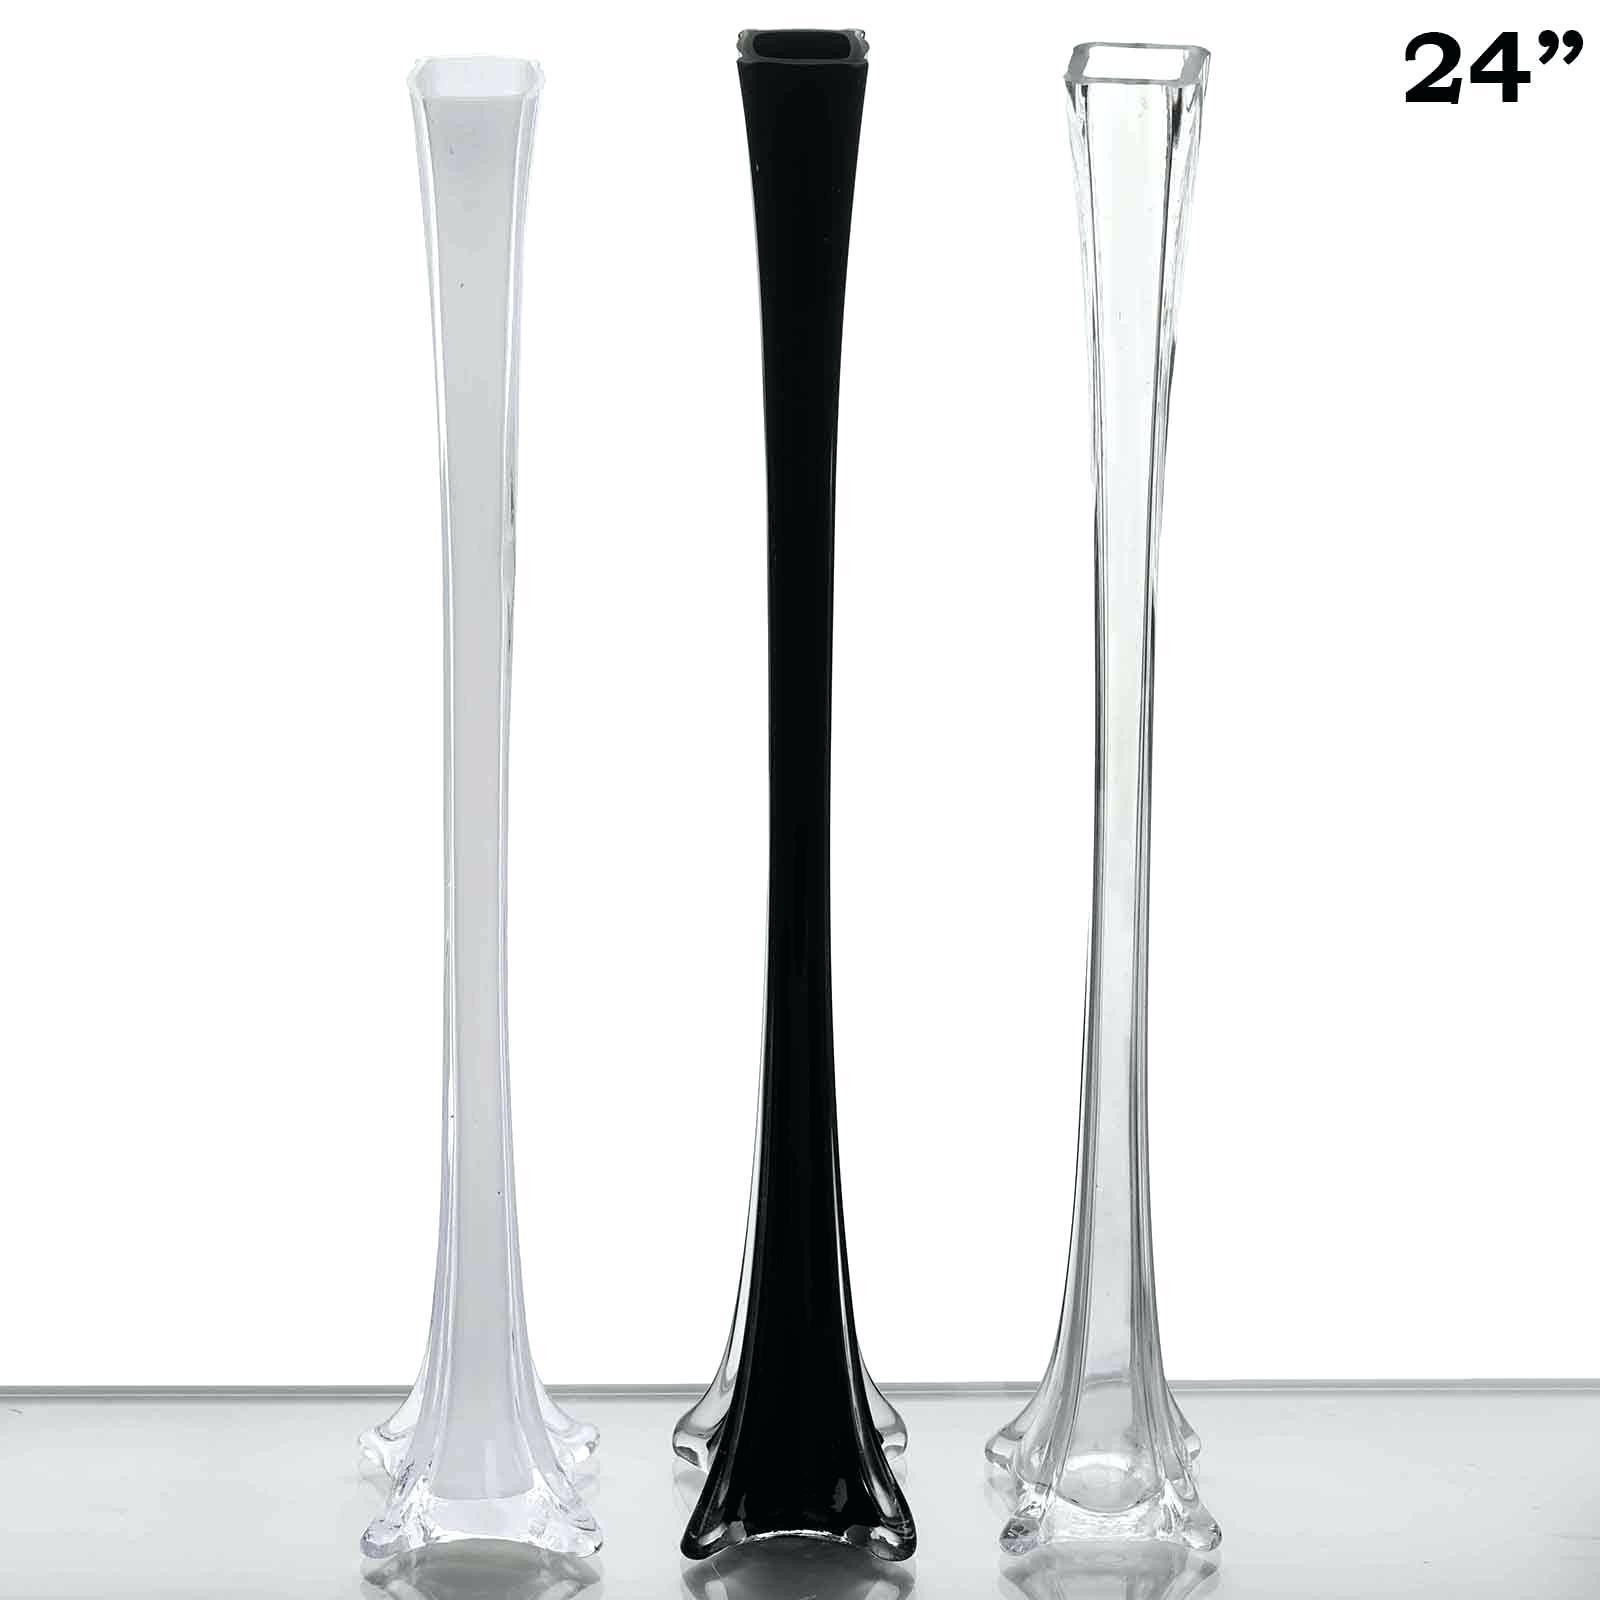 11 Unique Small Decorative Glass Vases 2024 free download small decorative glass vases of glass vases with lids image living room glass vases fresh clear vase pertaining to glass vases with lids images fantastic chair decor ideas from living room v